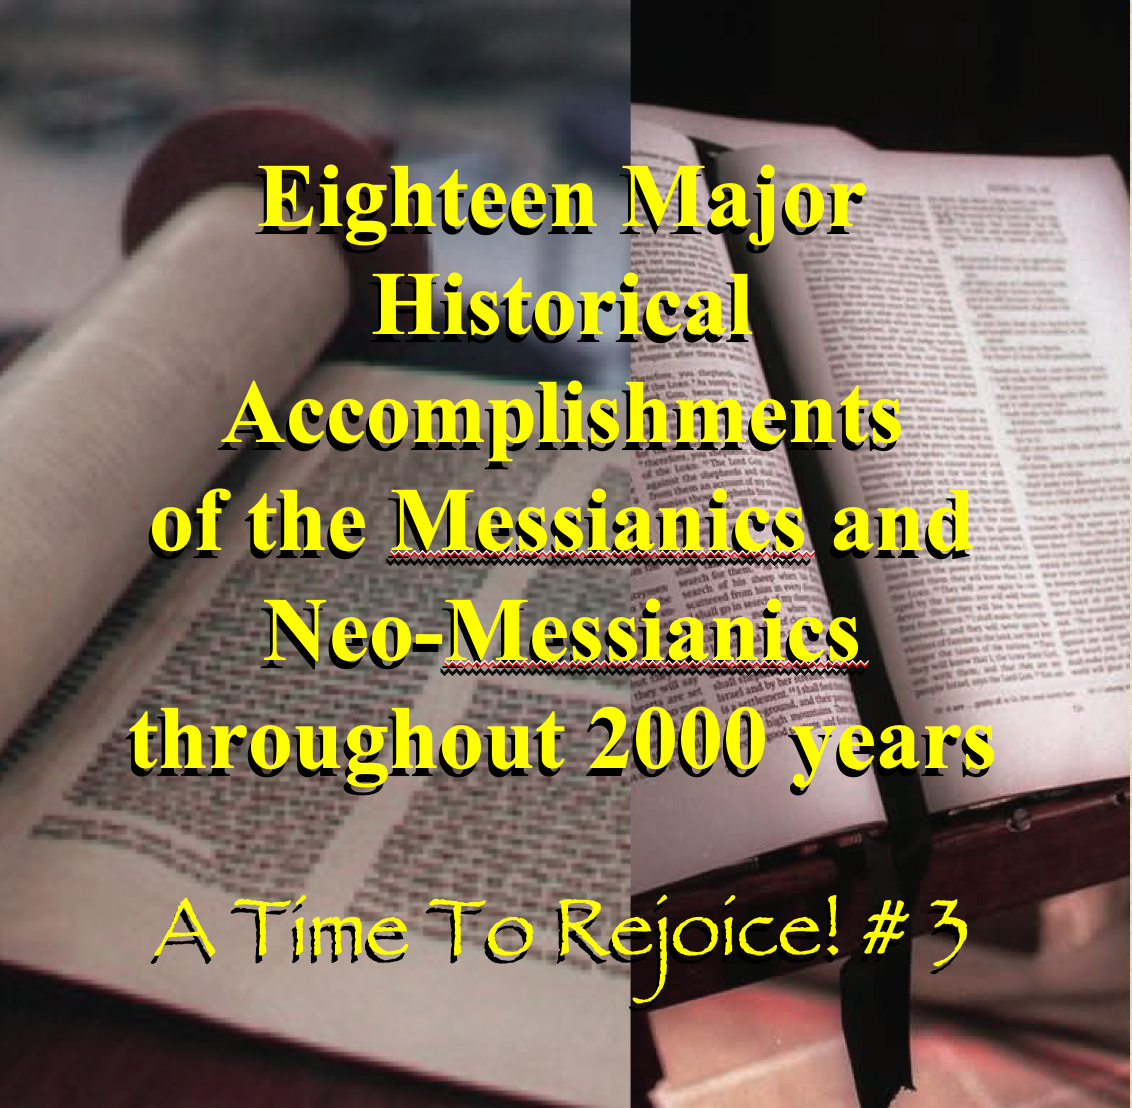 # 3. ‘18 Major Accomplishments of the Messianic Church’ by Dr Miles R. Jones - MP4 Video for Download